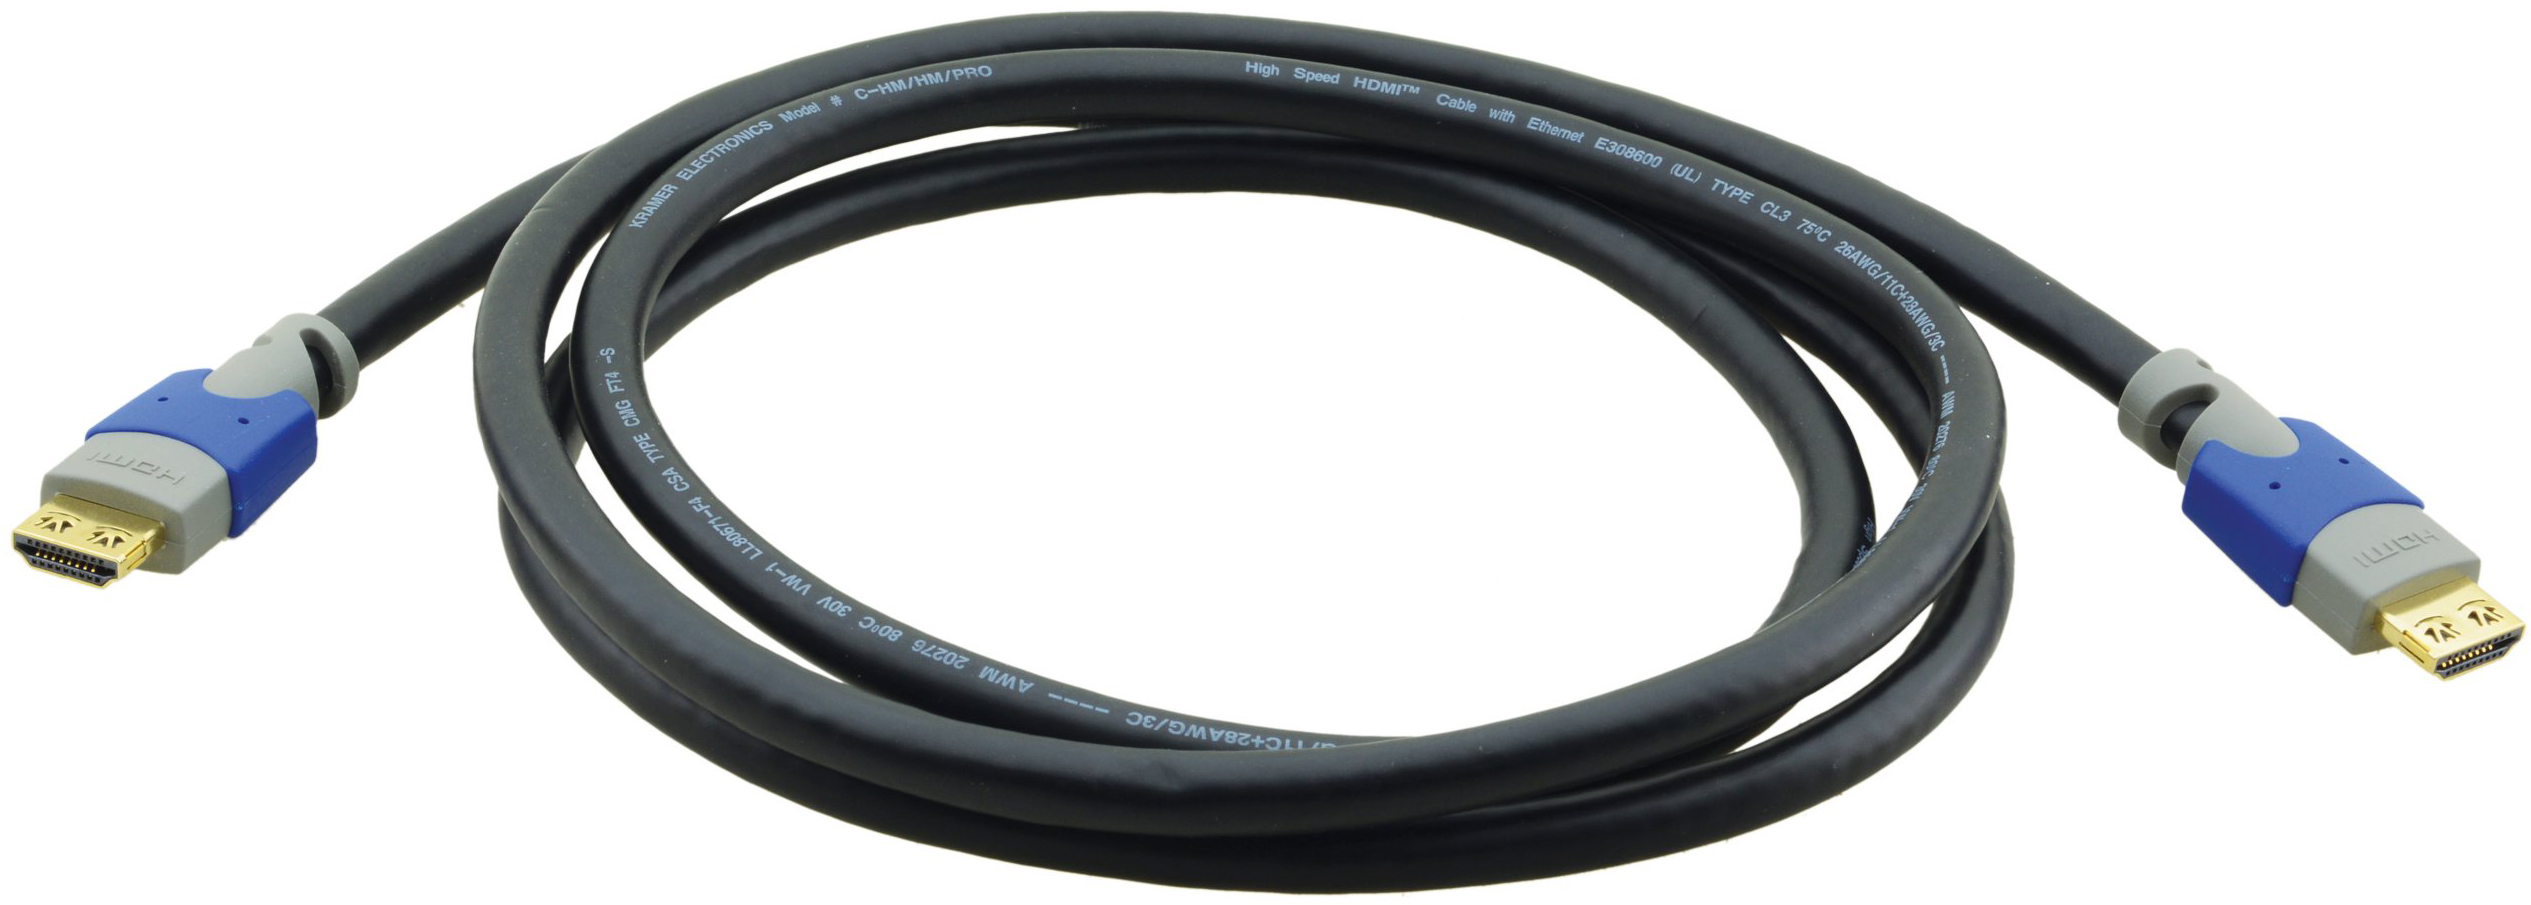 You Recently Viewed Kramer Premium High Speed HDMI Cable w/Ethernet Image